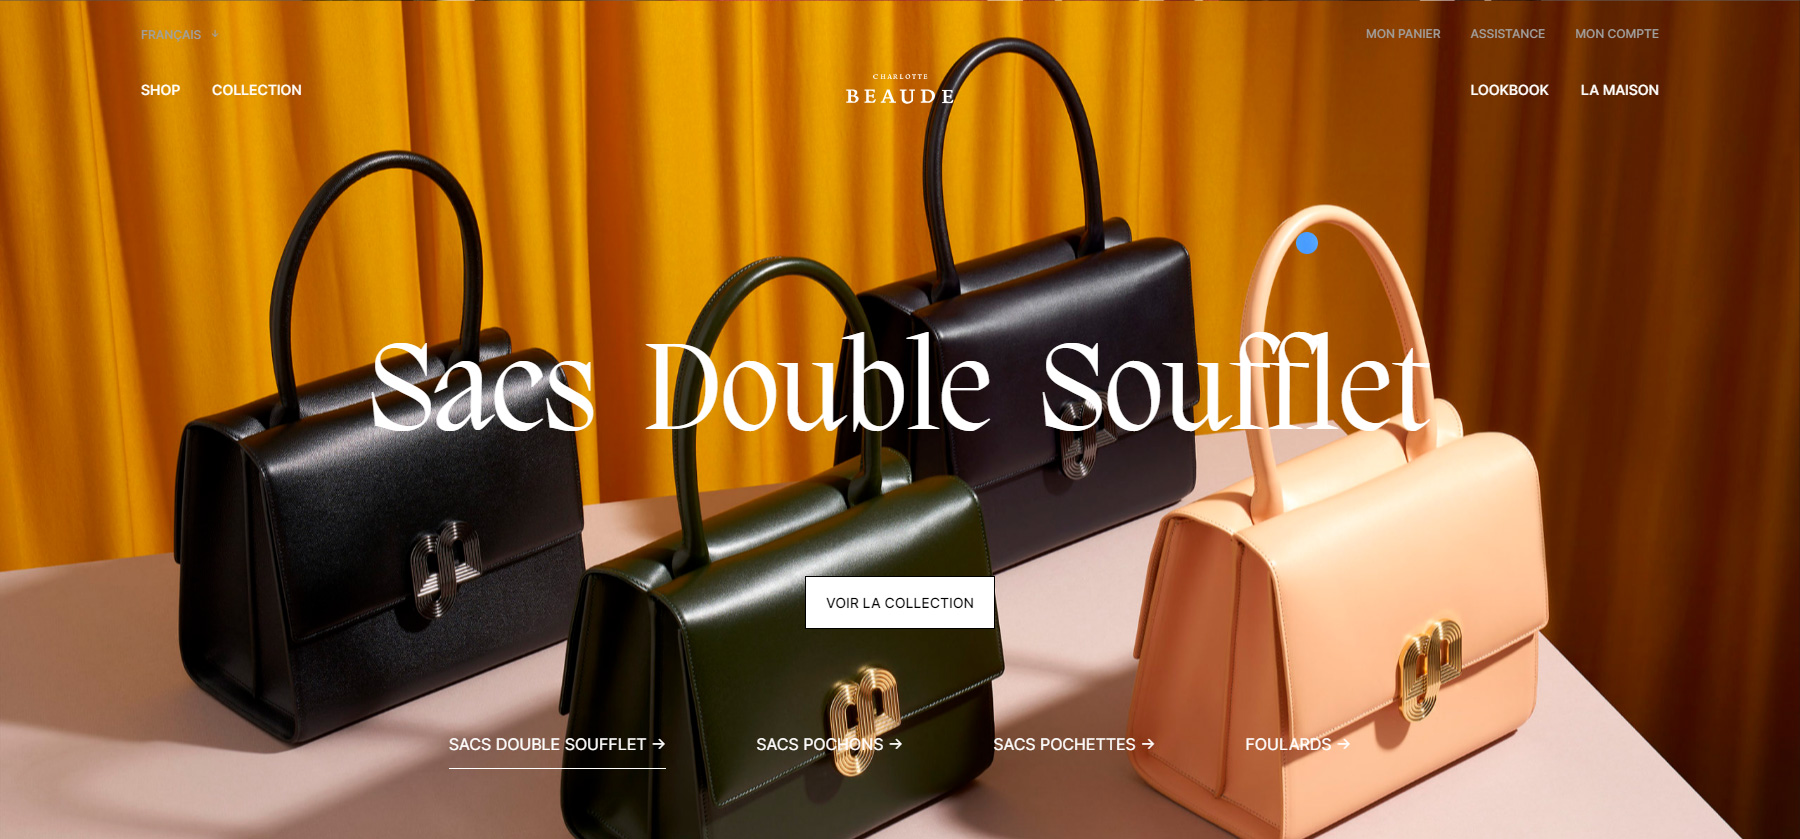 Charlotte Beaude - Website of the Day